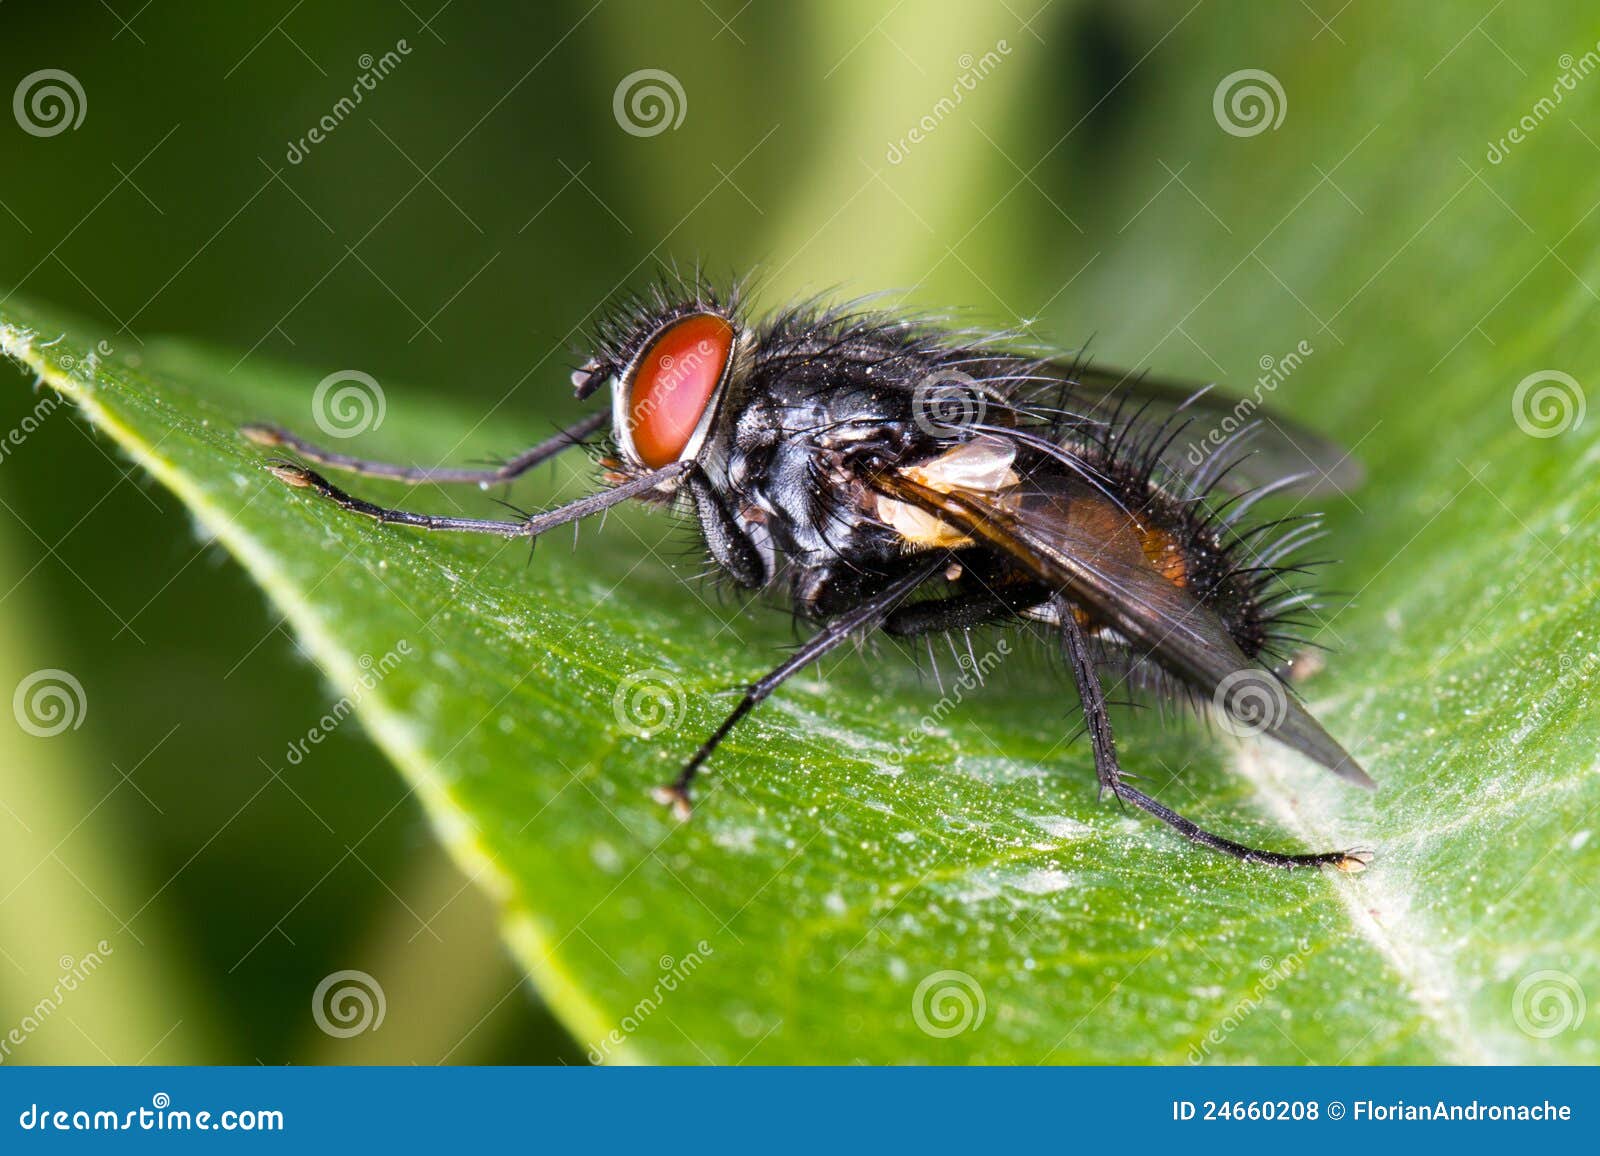 common house fly (musca domestica) on a green leaf